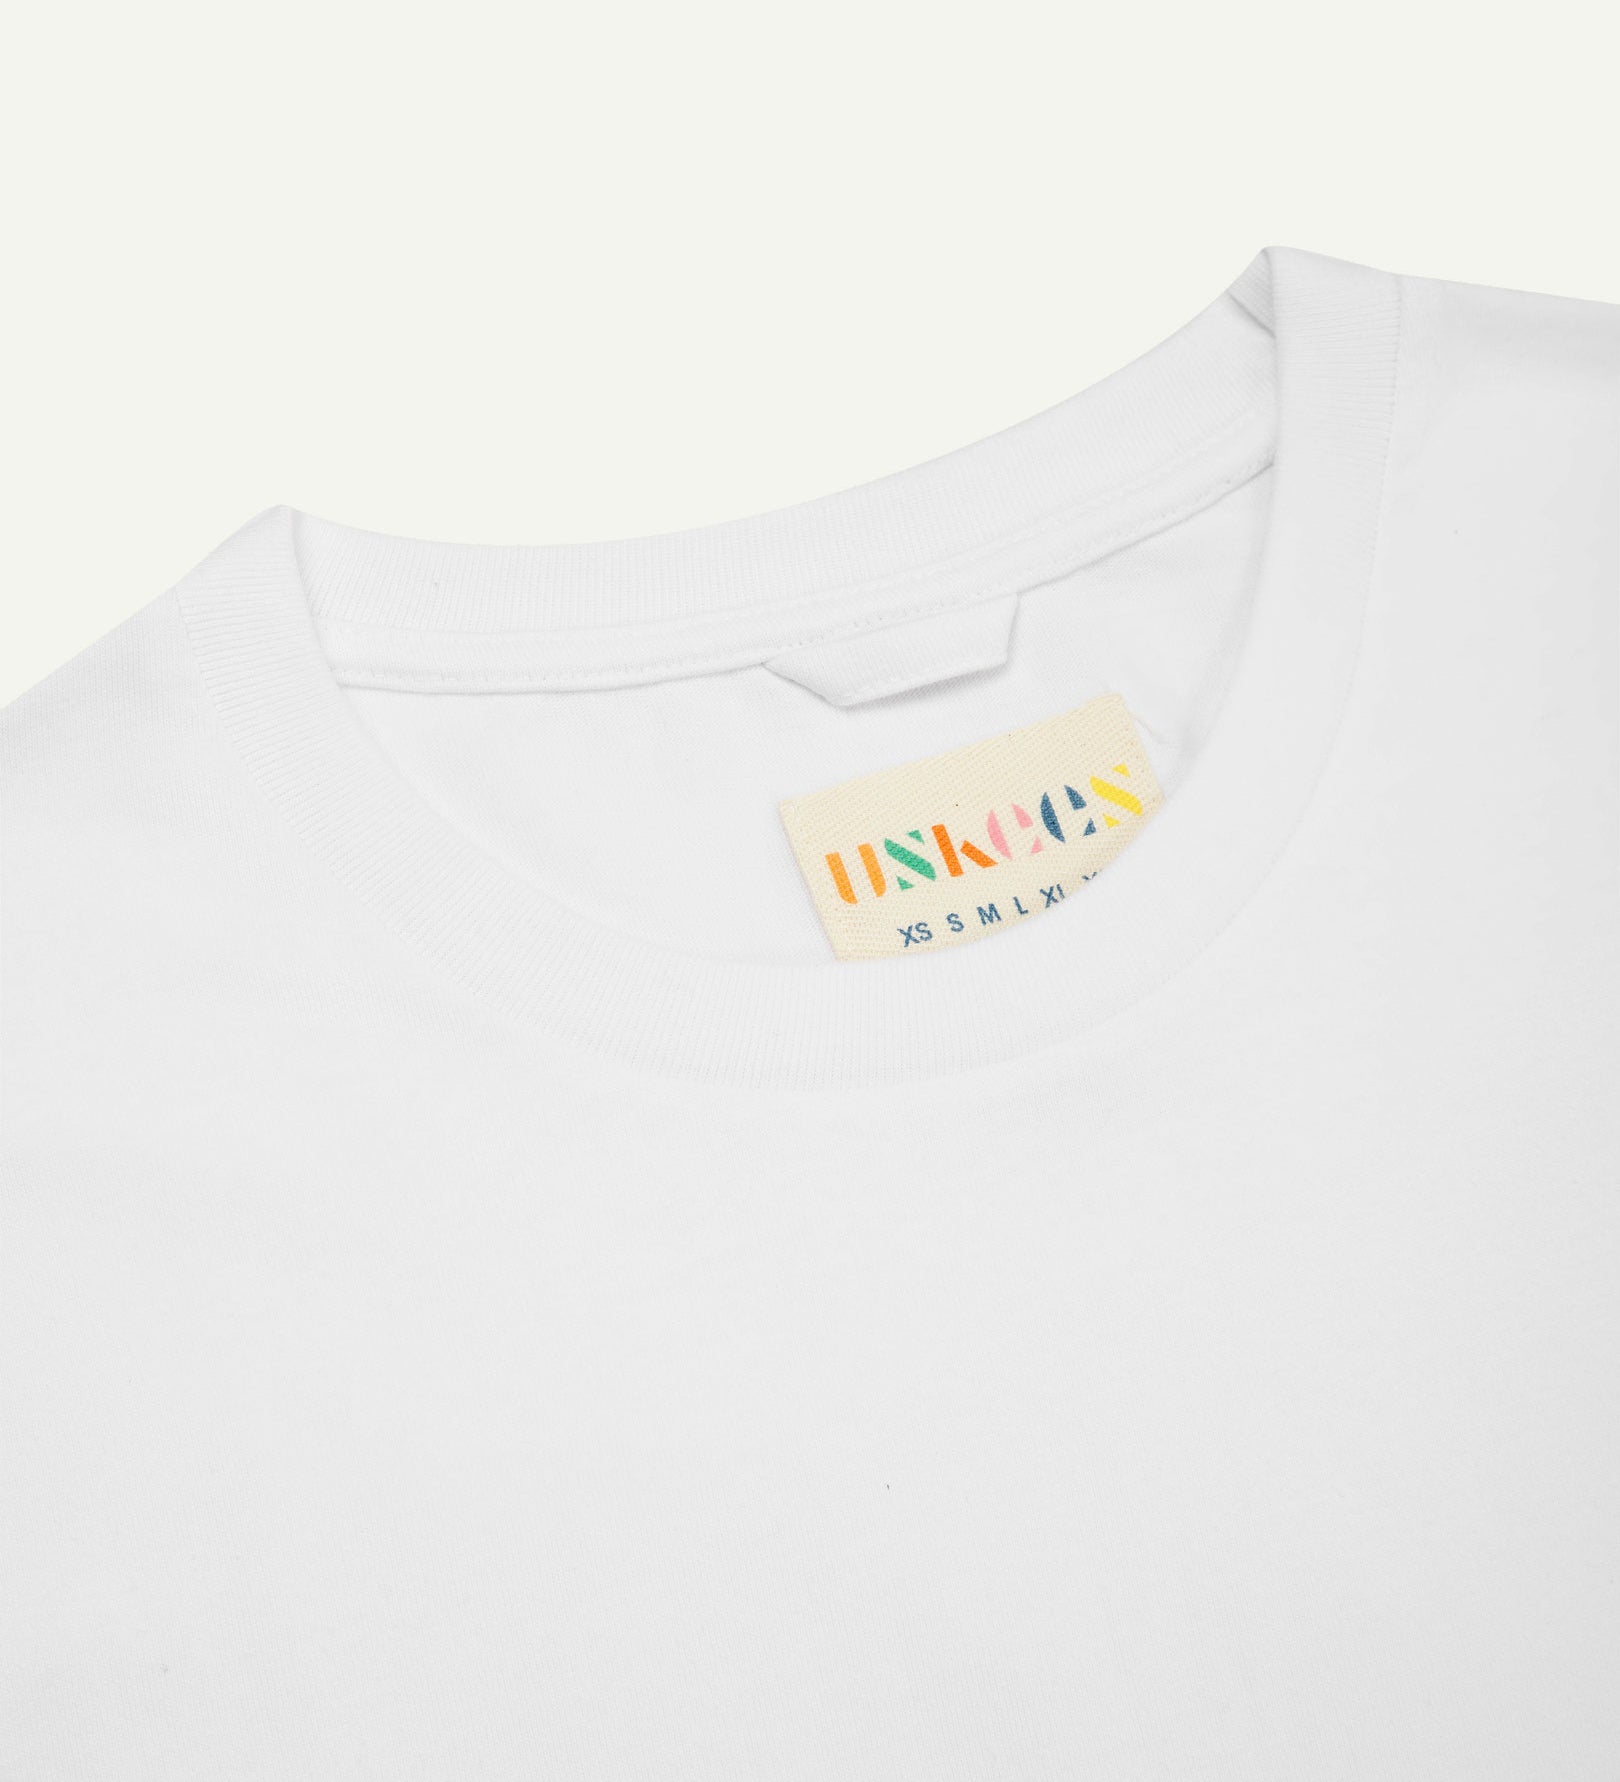 Neckline close-up of Uskees white organic cotton T-shirt showing hanging loop and branding label.